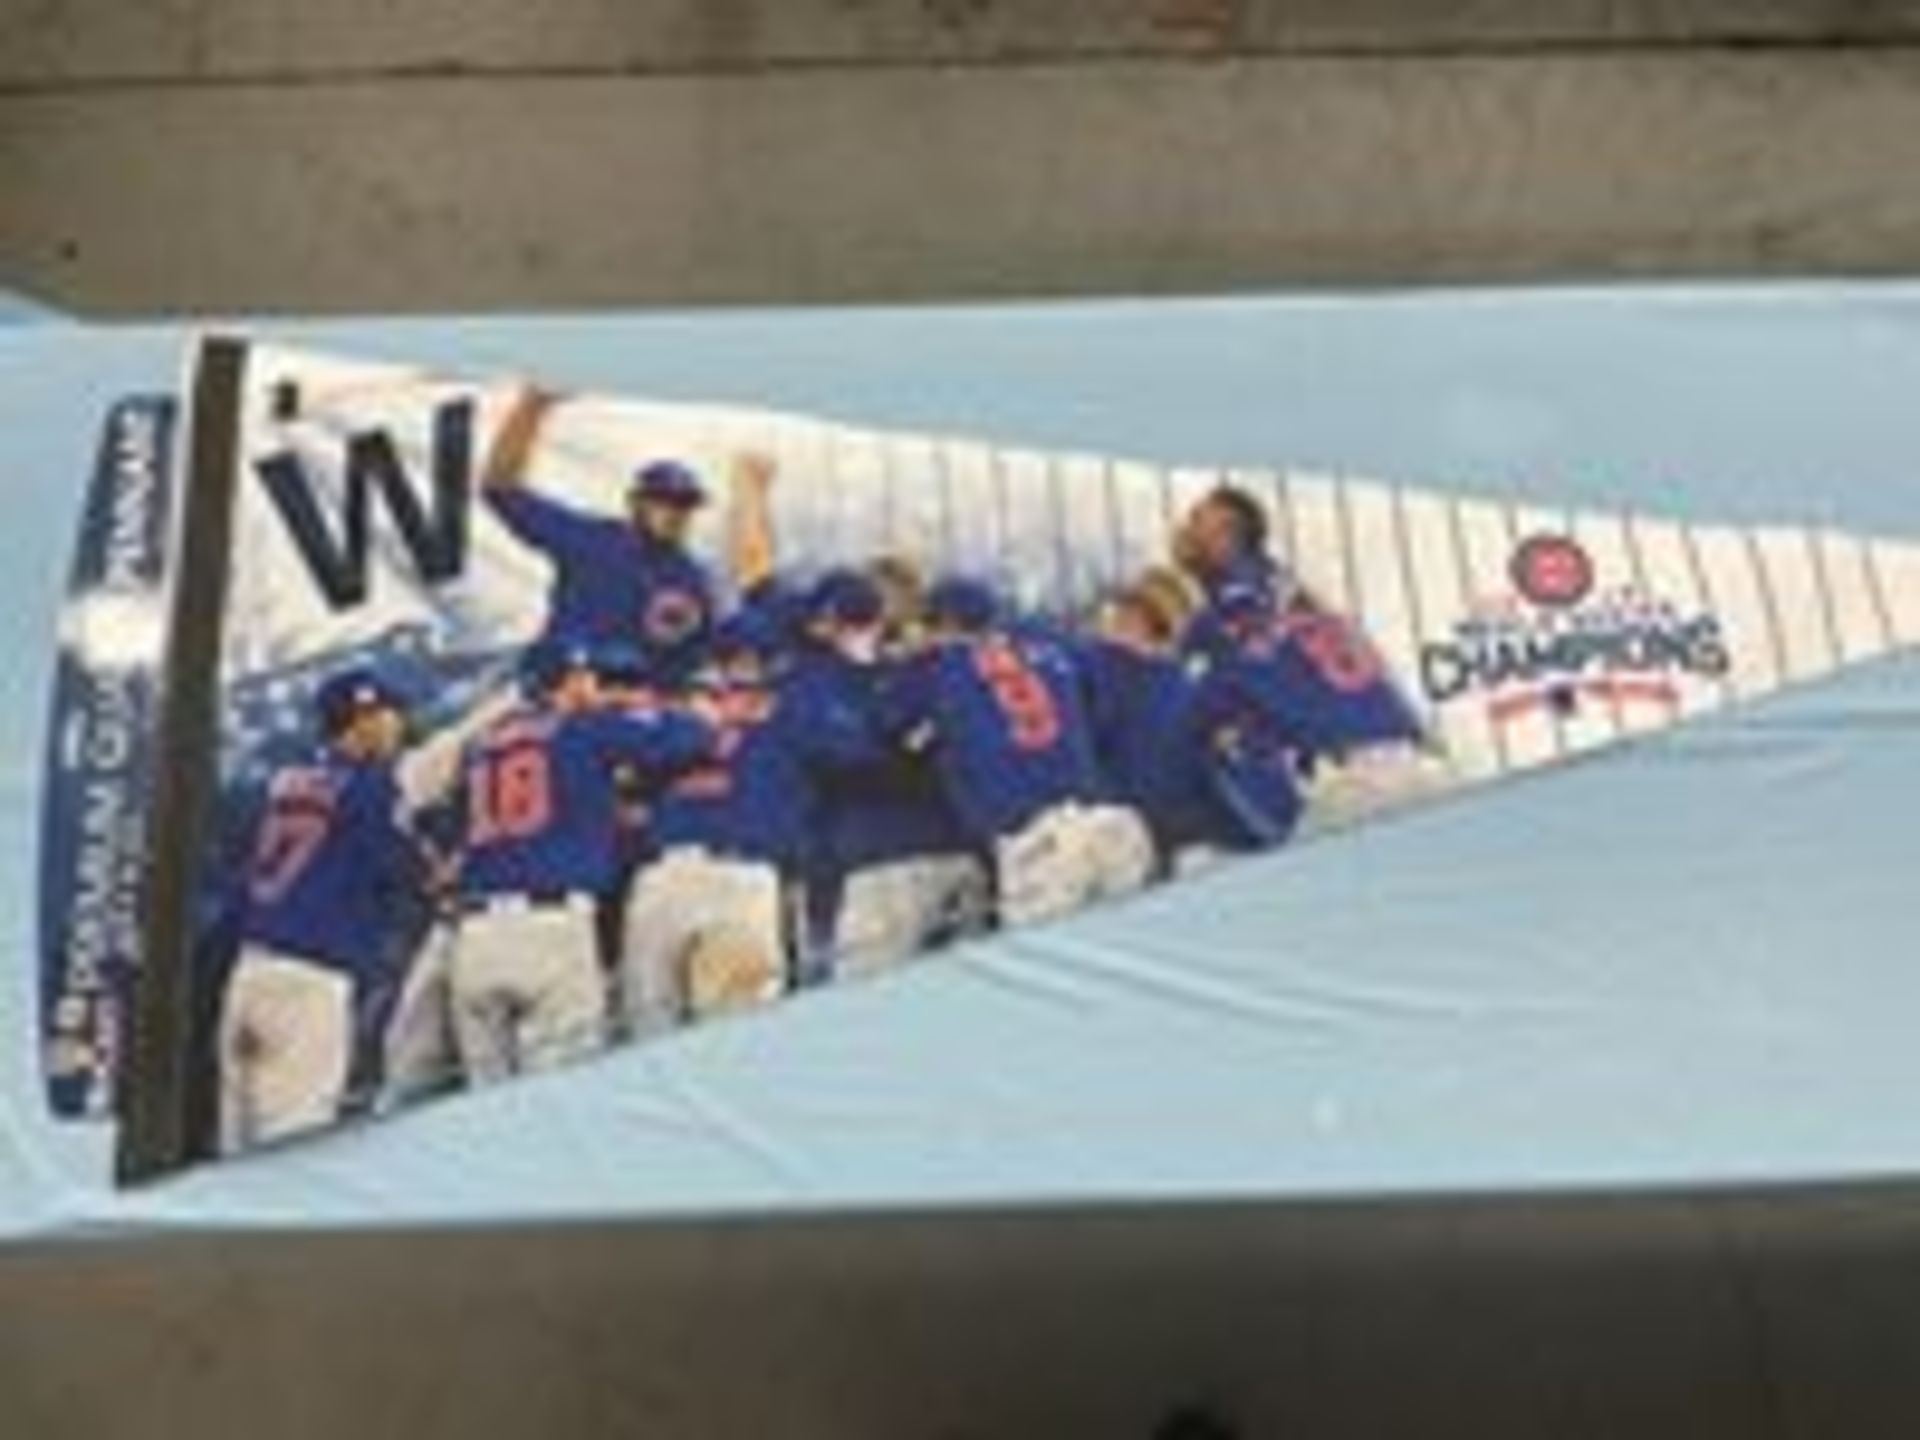 (Lot) 2016 Chicago Cubs World Series Cubs c/o: 5 Win Craft Pins, Opening Day Ticket Stub in case - Image 8 of 10